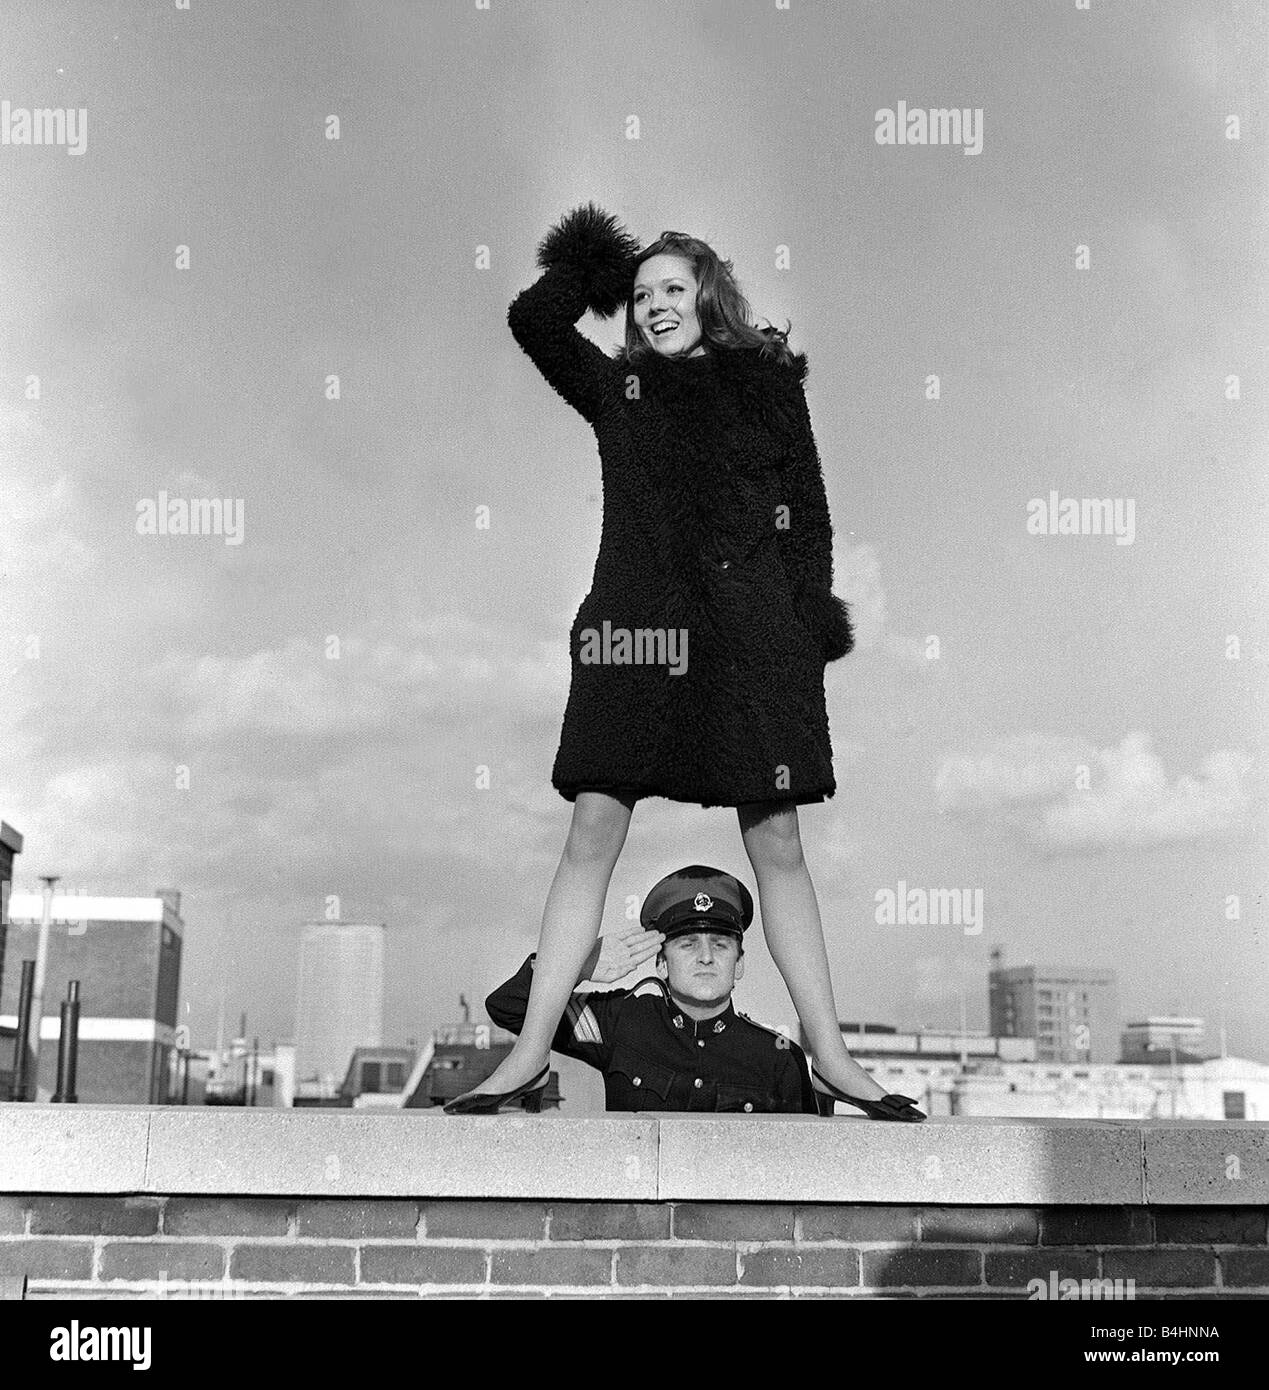 John Thaw March 1966 Actor aged 24 years old starring as Sgt John Mann in ABC Production Redcap for BBC Television Pictured with Diana Rigg Actress during Photocall on the roof of ABC TV in Hanover Square London Diana Rigg Emma Peel star of The Avengers TV Programme current series just ended wishes luck to John Thaw whose new Redcap series is about to begin Mirrorpix Stock Photo